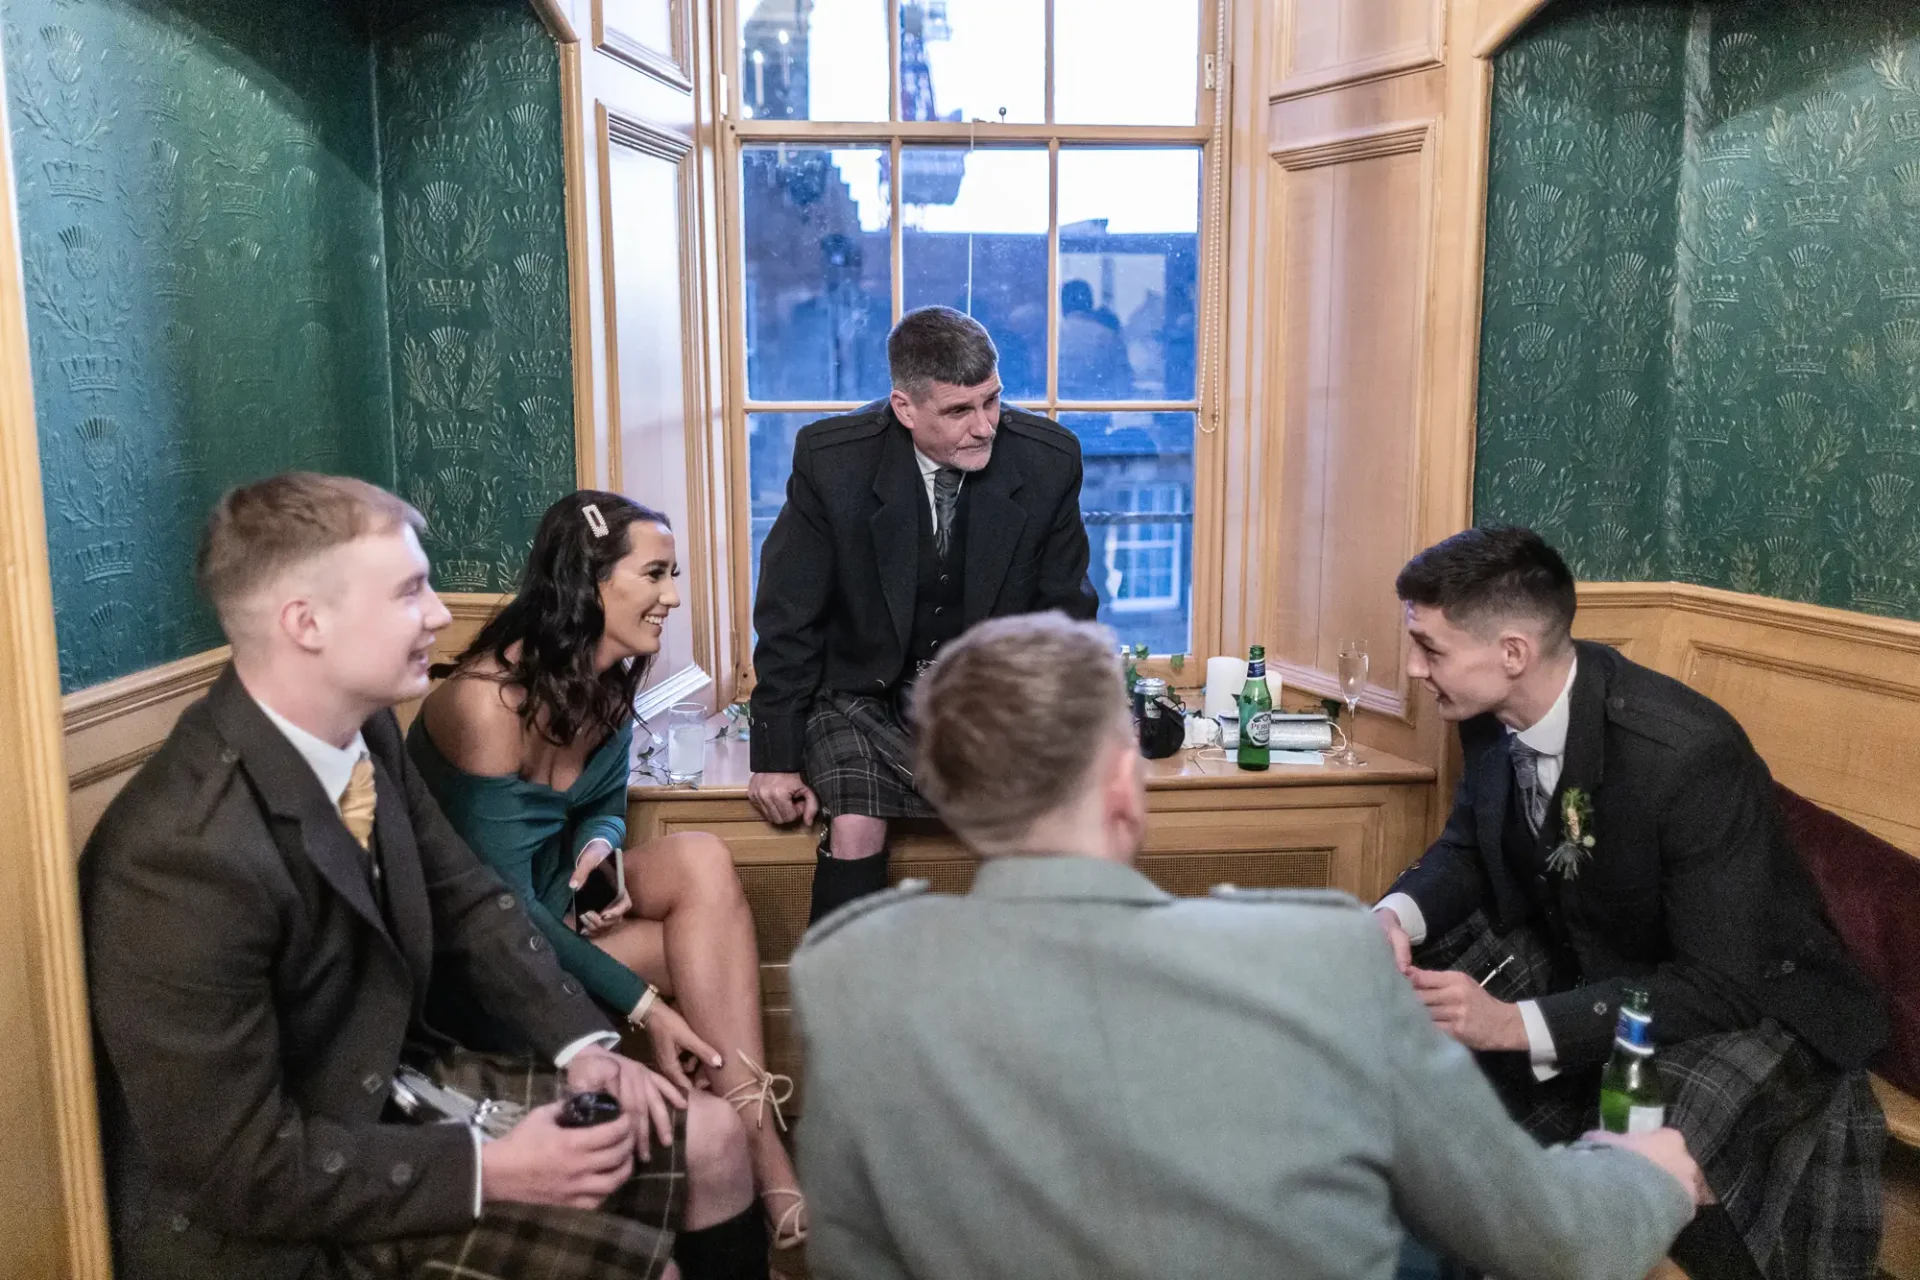 Group of young adults in traditional scottish attire enjoying a lively conversation in an ornate room with green walls and large windows.